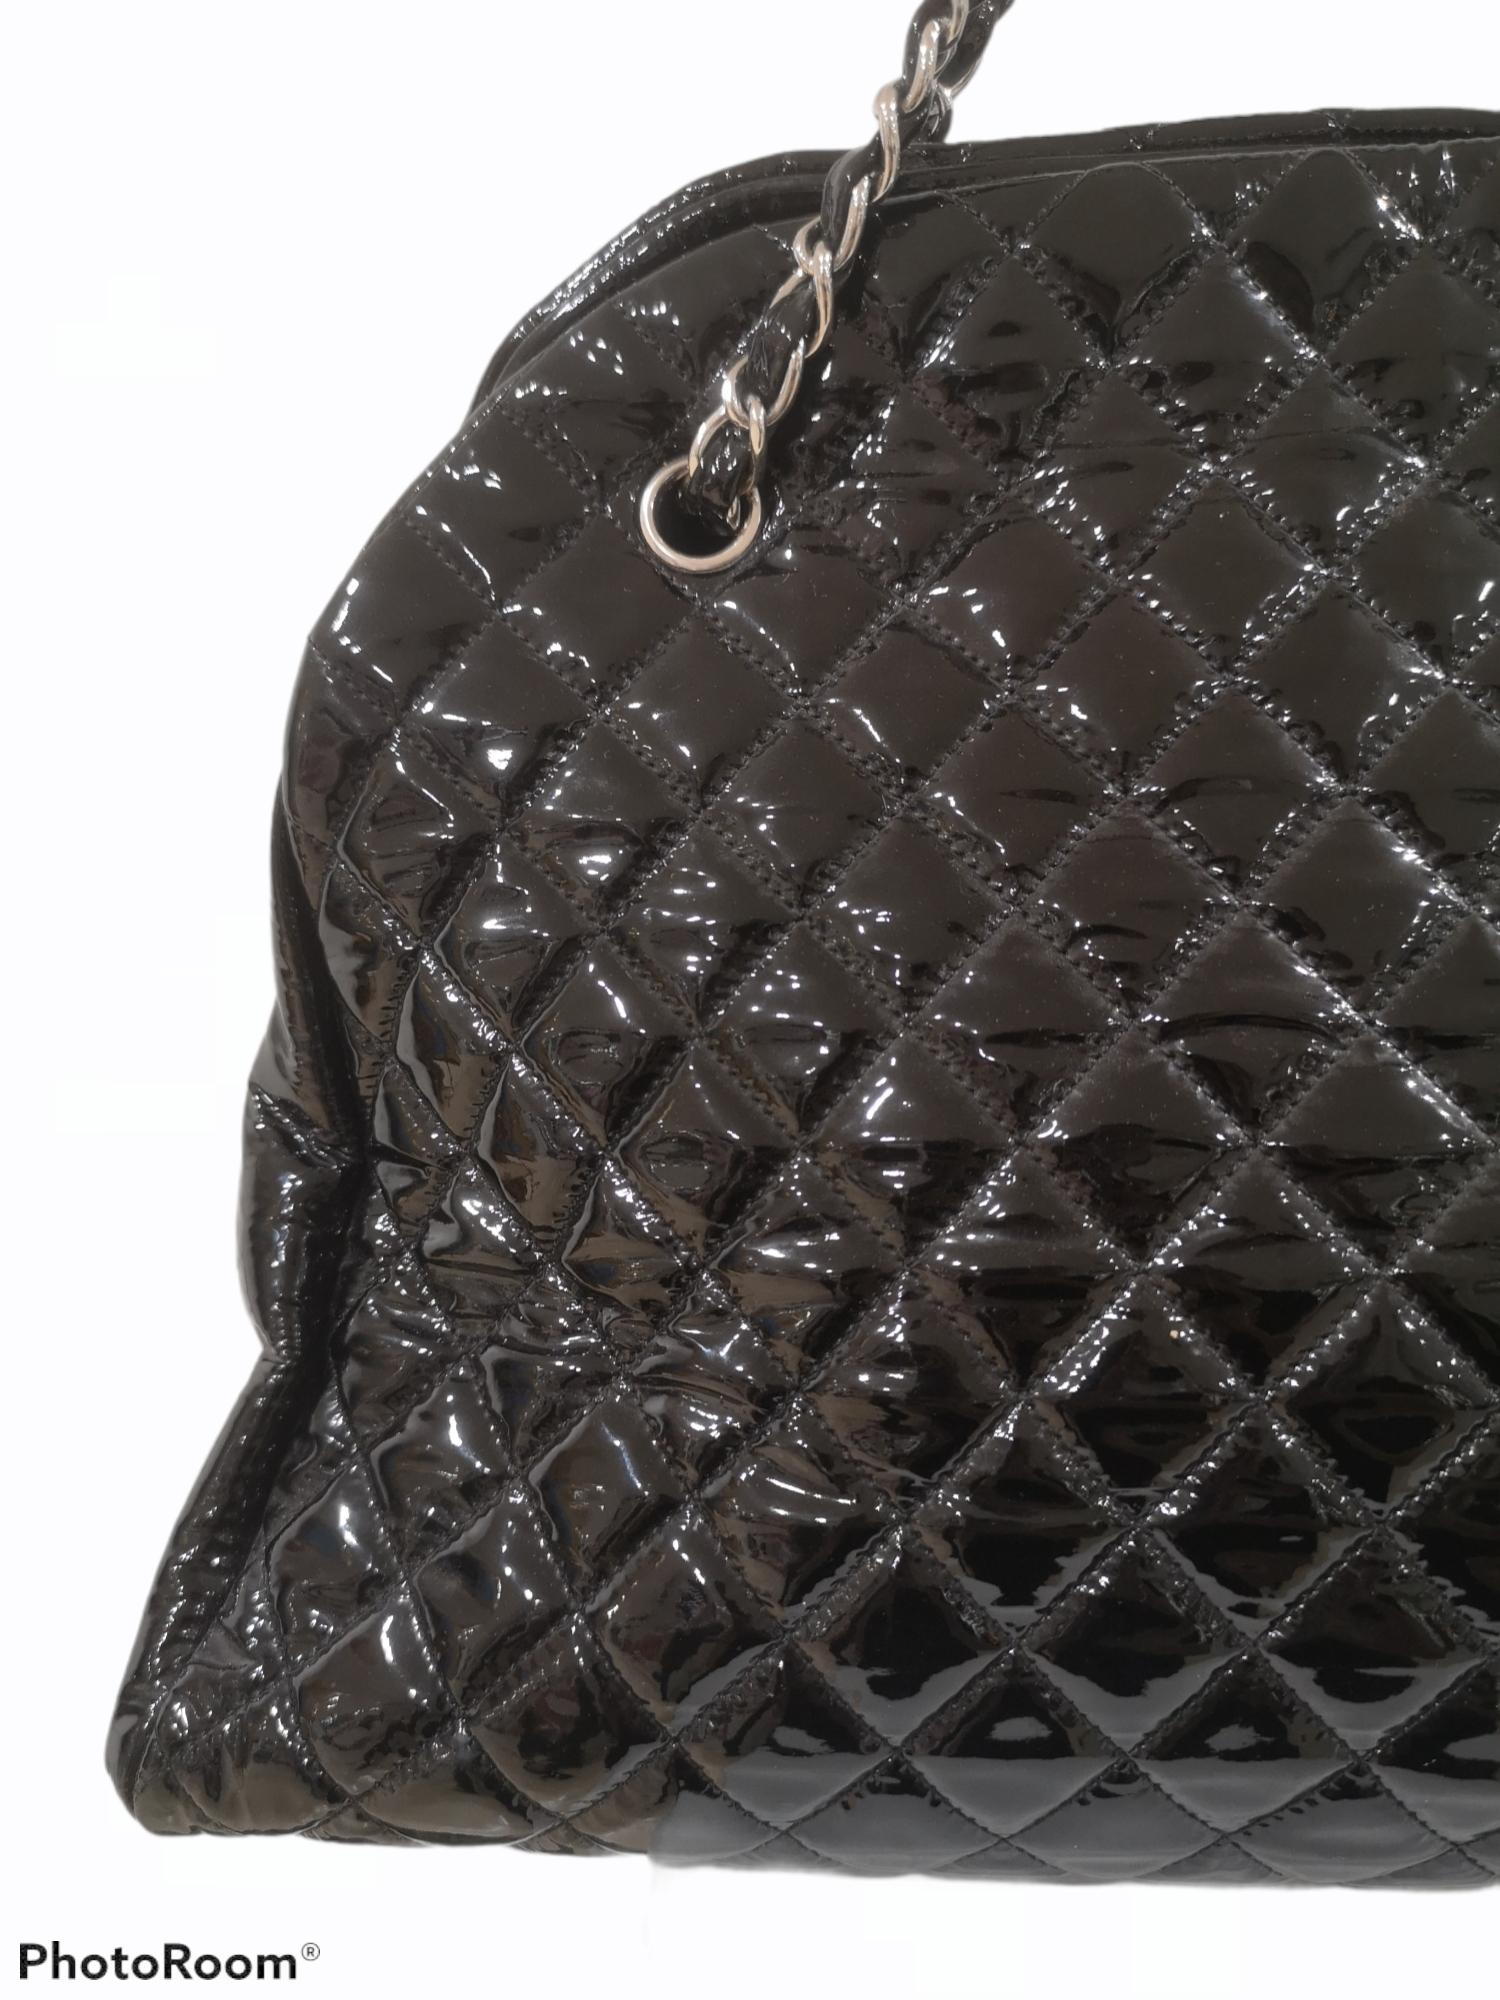 Chanel Just Mademoiselle Bowler Black patent Leather Bag
This trendy Chanel Just Mademoiselle bowler bag is crafted from black quilted patent leather accented with silver-tone hardware. This bag features dual chain and leather entwined shoulder